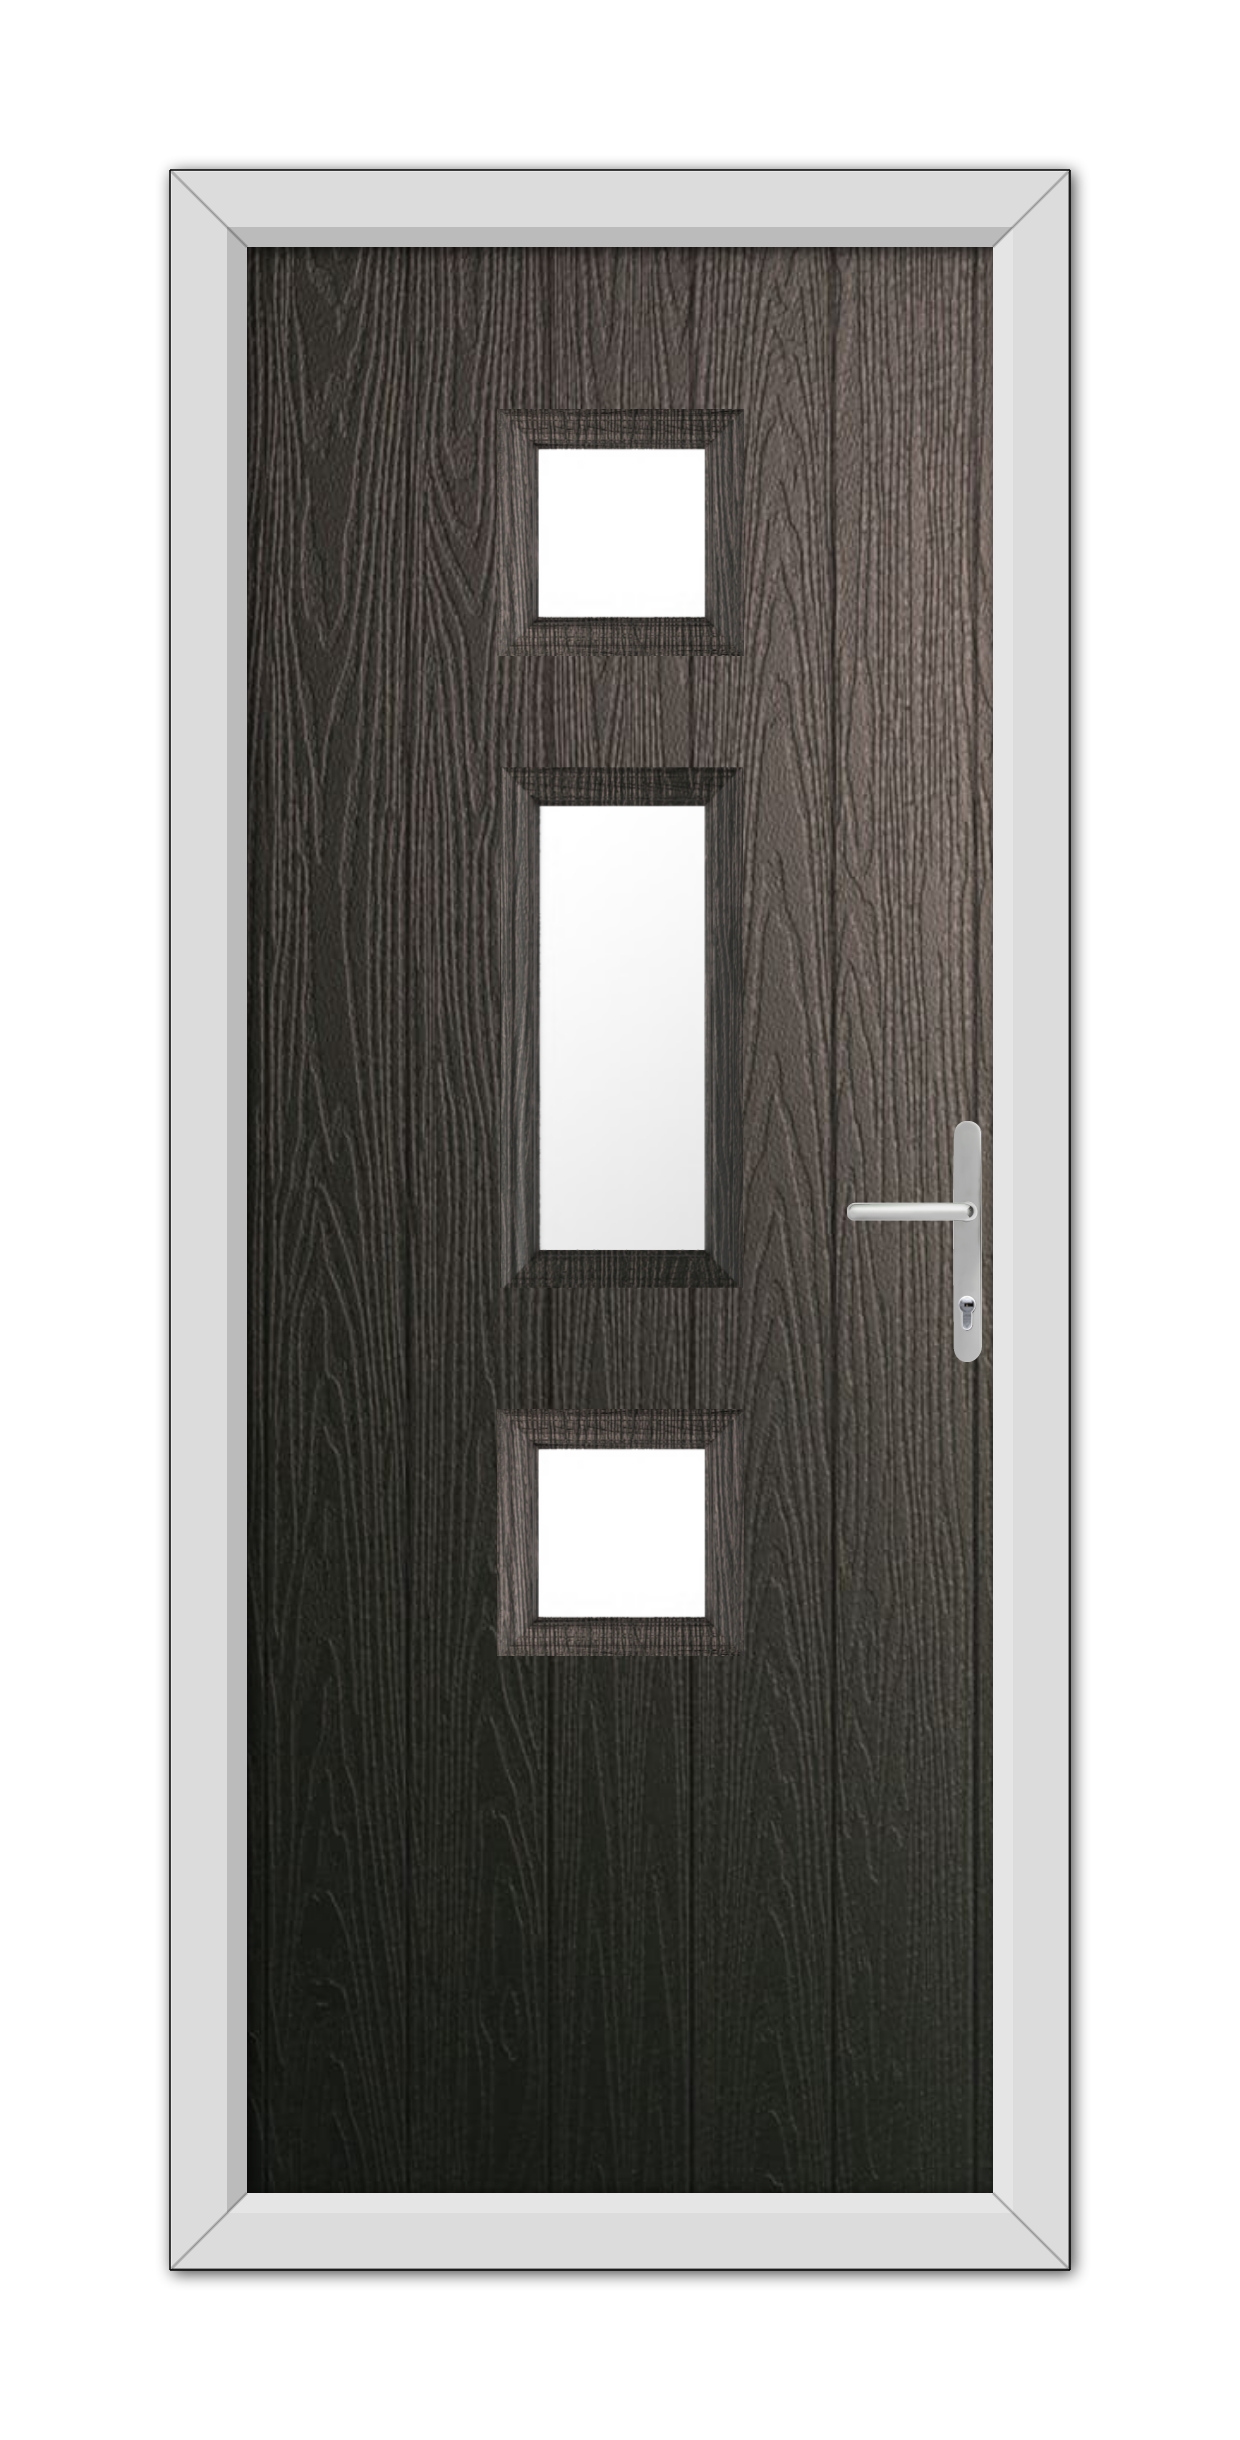 A Schwarzbraun York Composite Door 48mm Timber Core with three square glass panels and a metallic handle, set within a white frame.